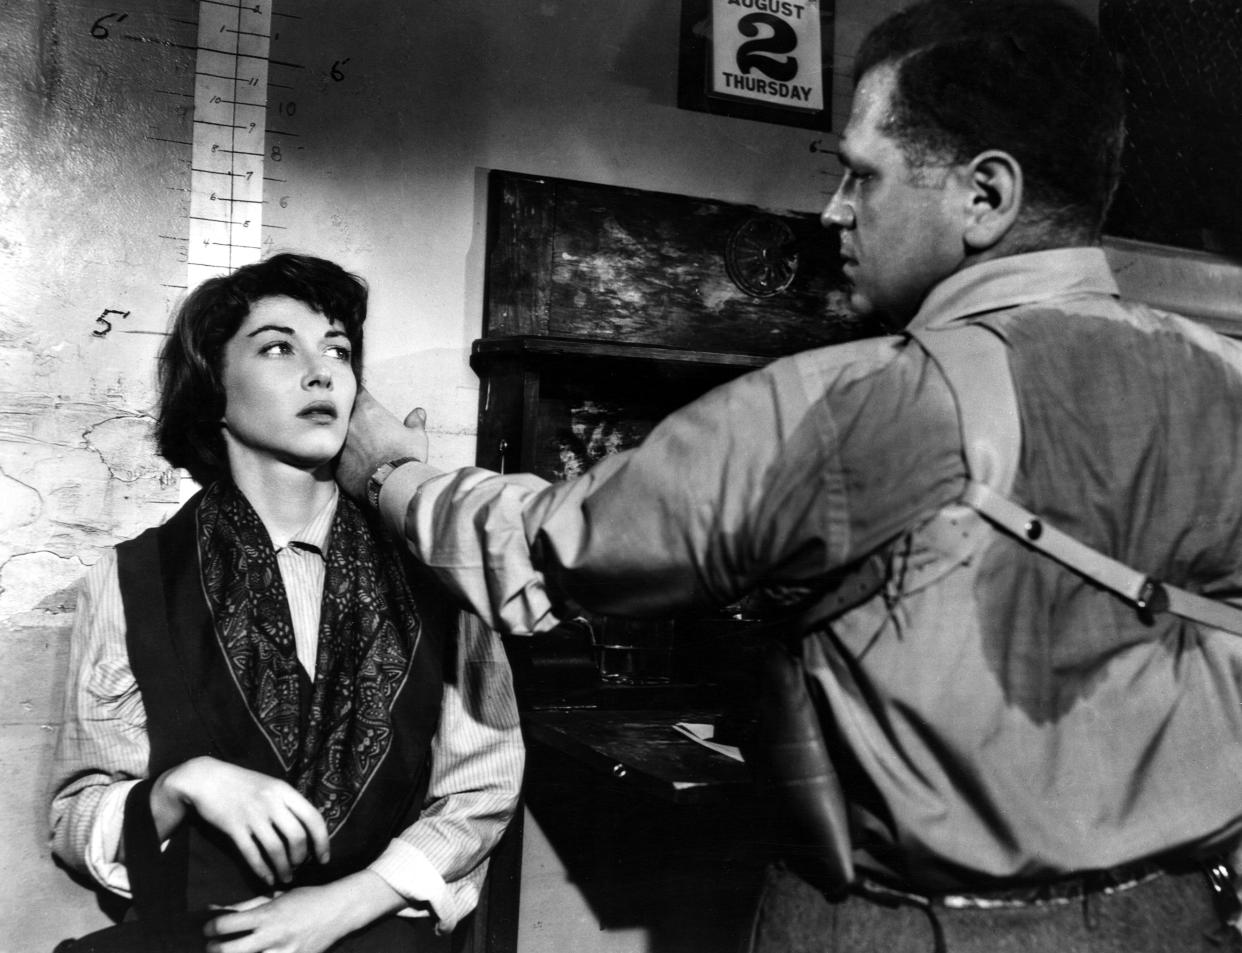 Grant in one of her earliest roles in 1951's Detective Story. (Photo: Courtesy Everett Collection)